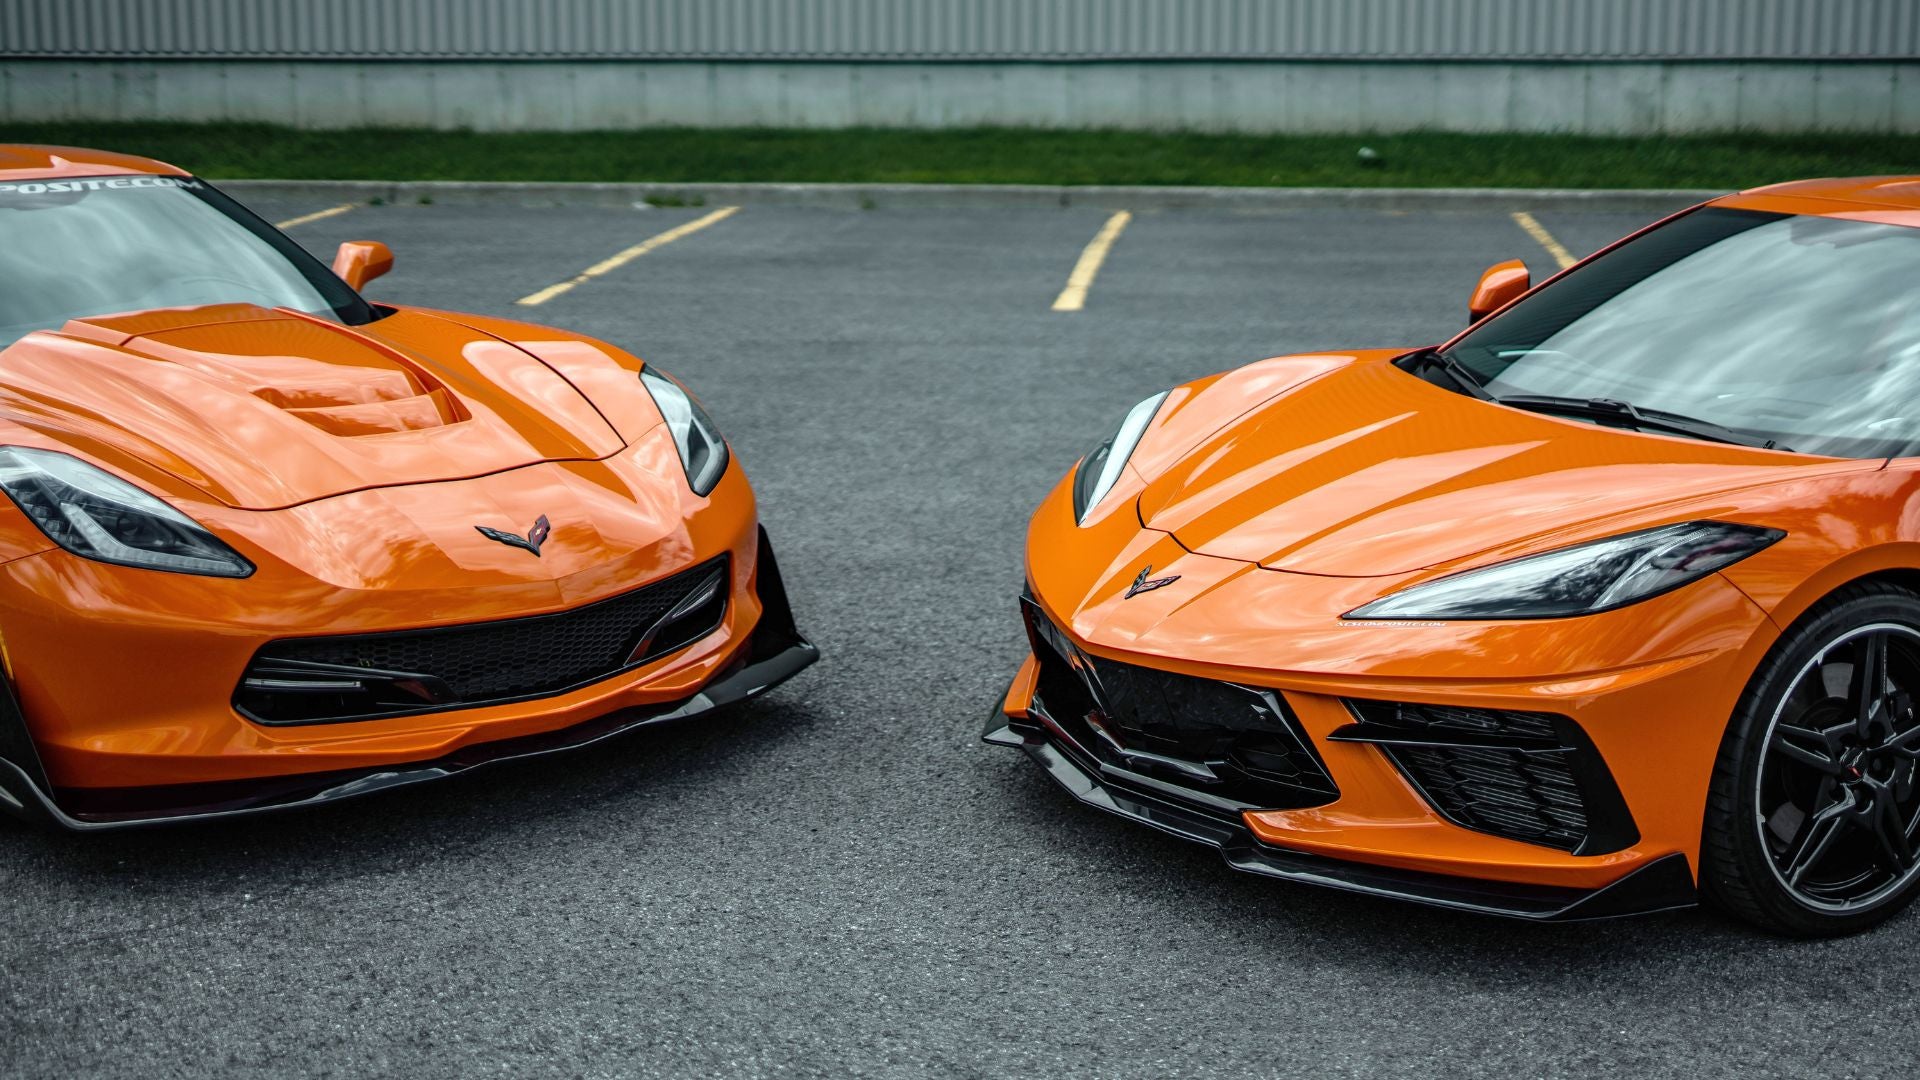 Two Sebring Orange Corvettes facing each other (C7 and C8)